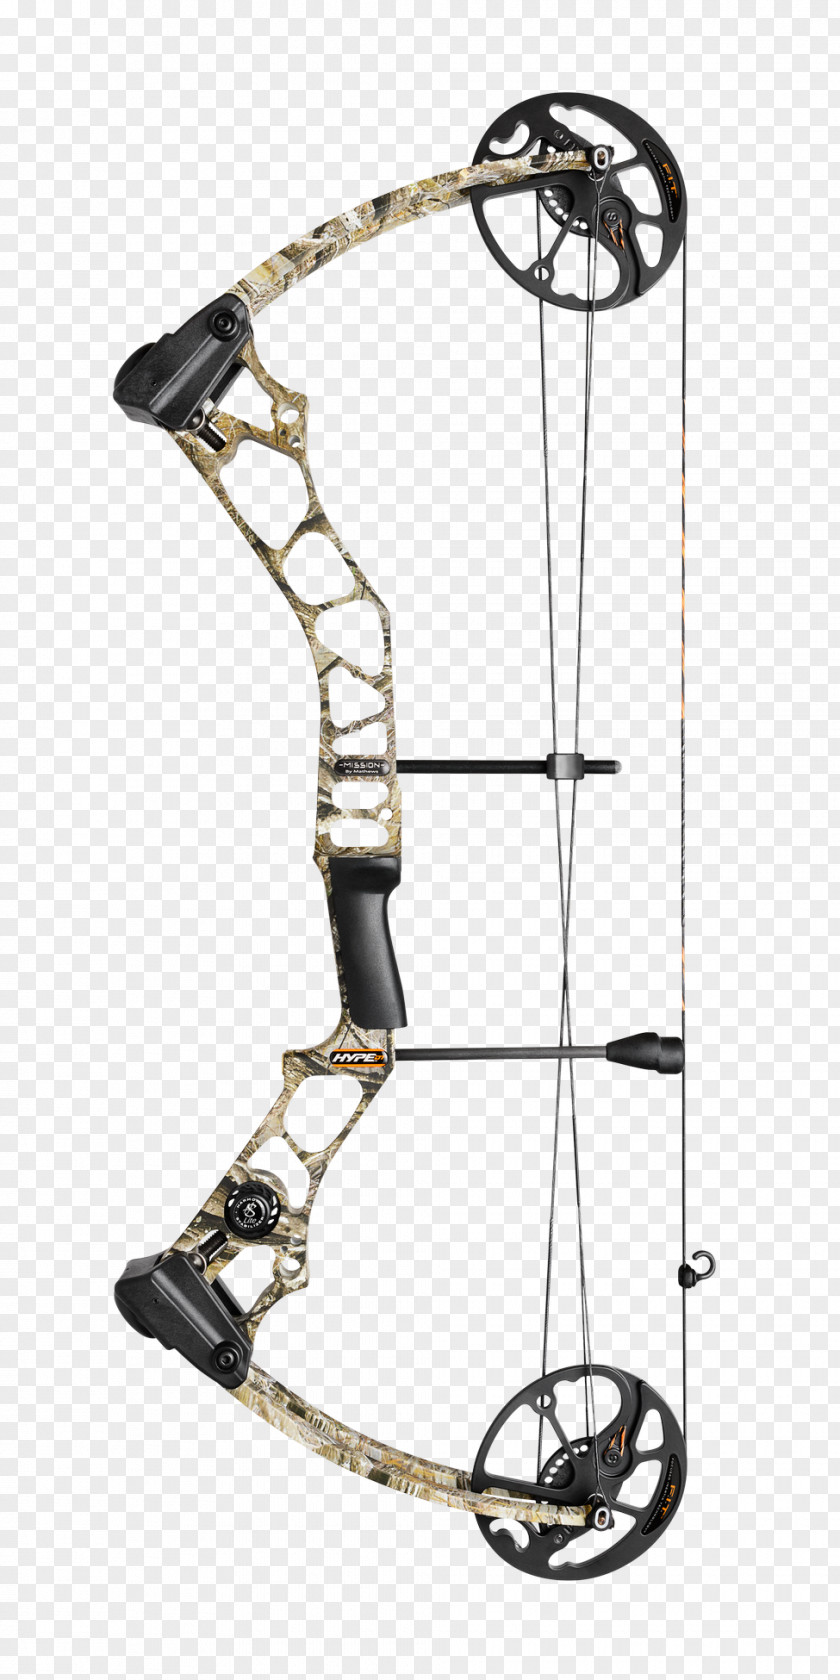 Introduced Compound Bows Archery Bow And Arrow Bowhunting PNG